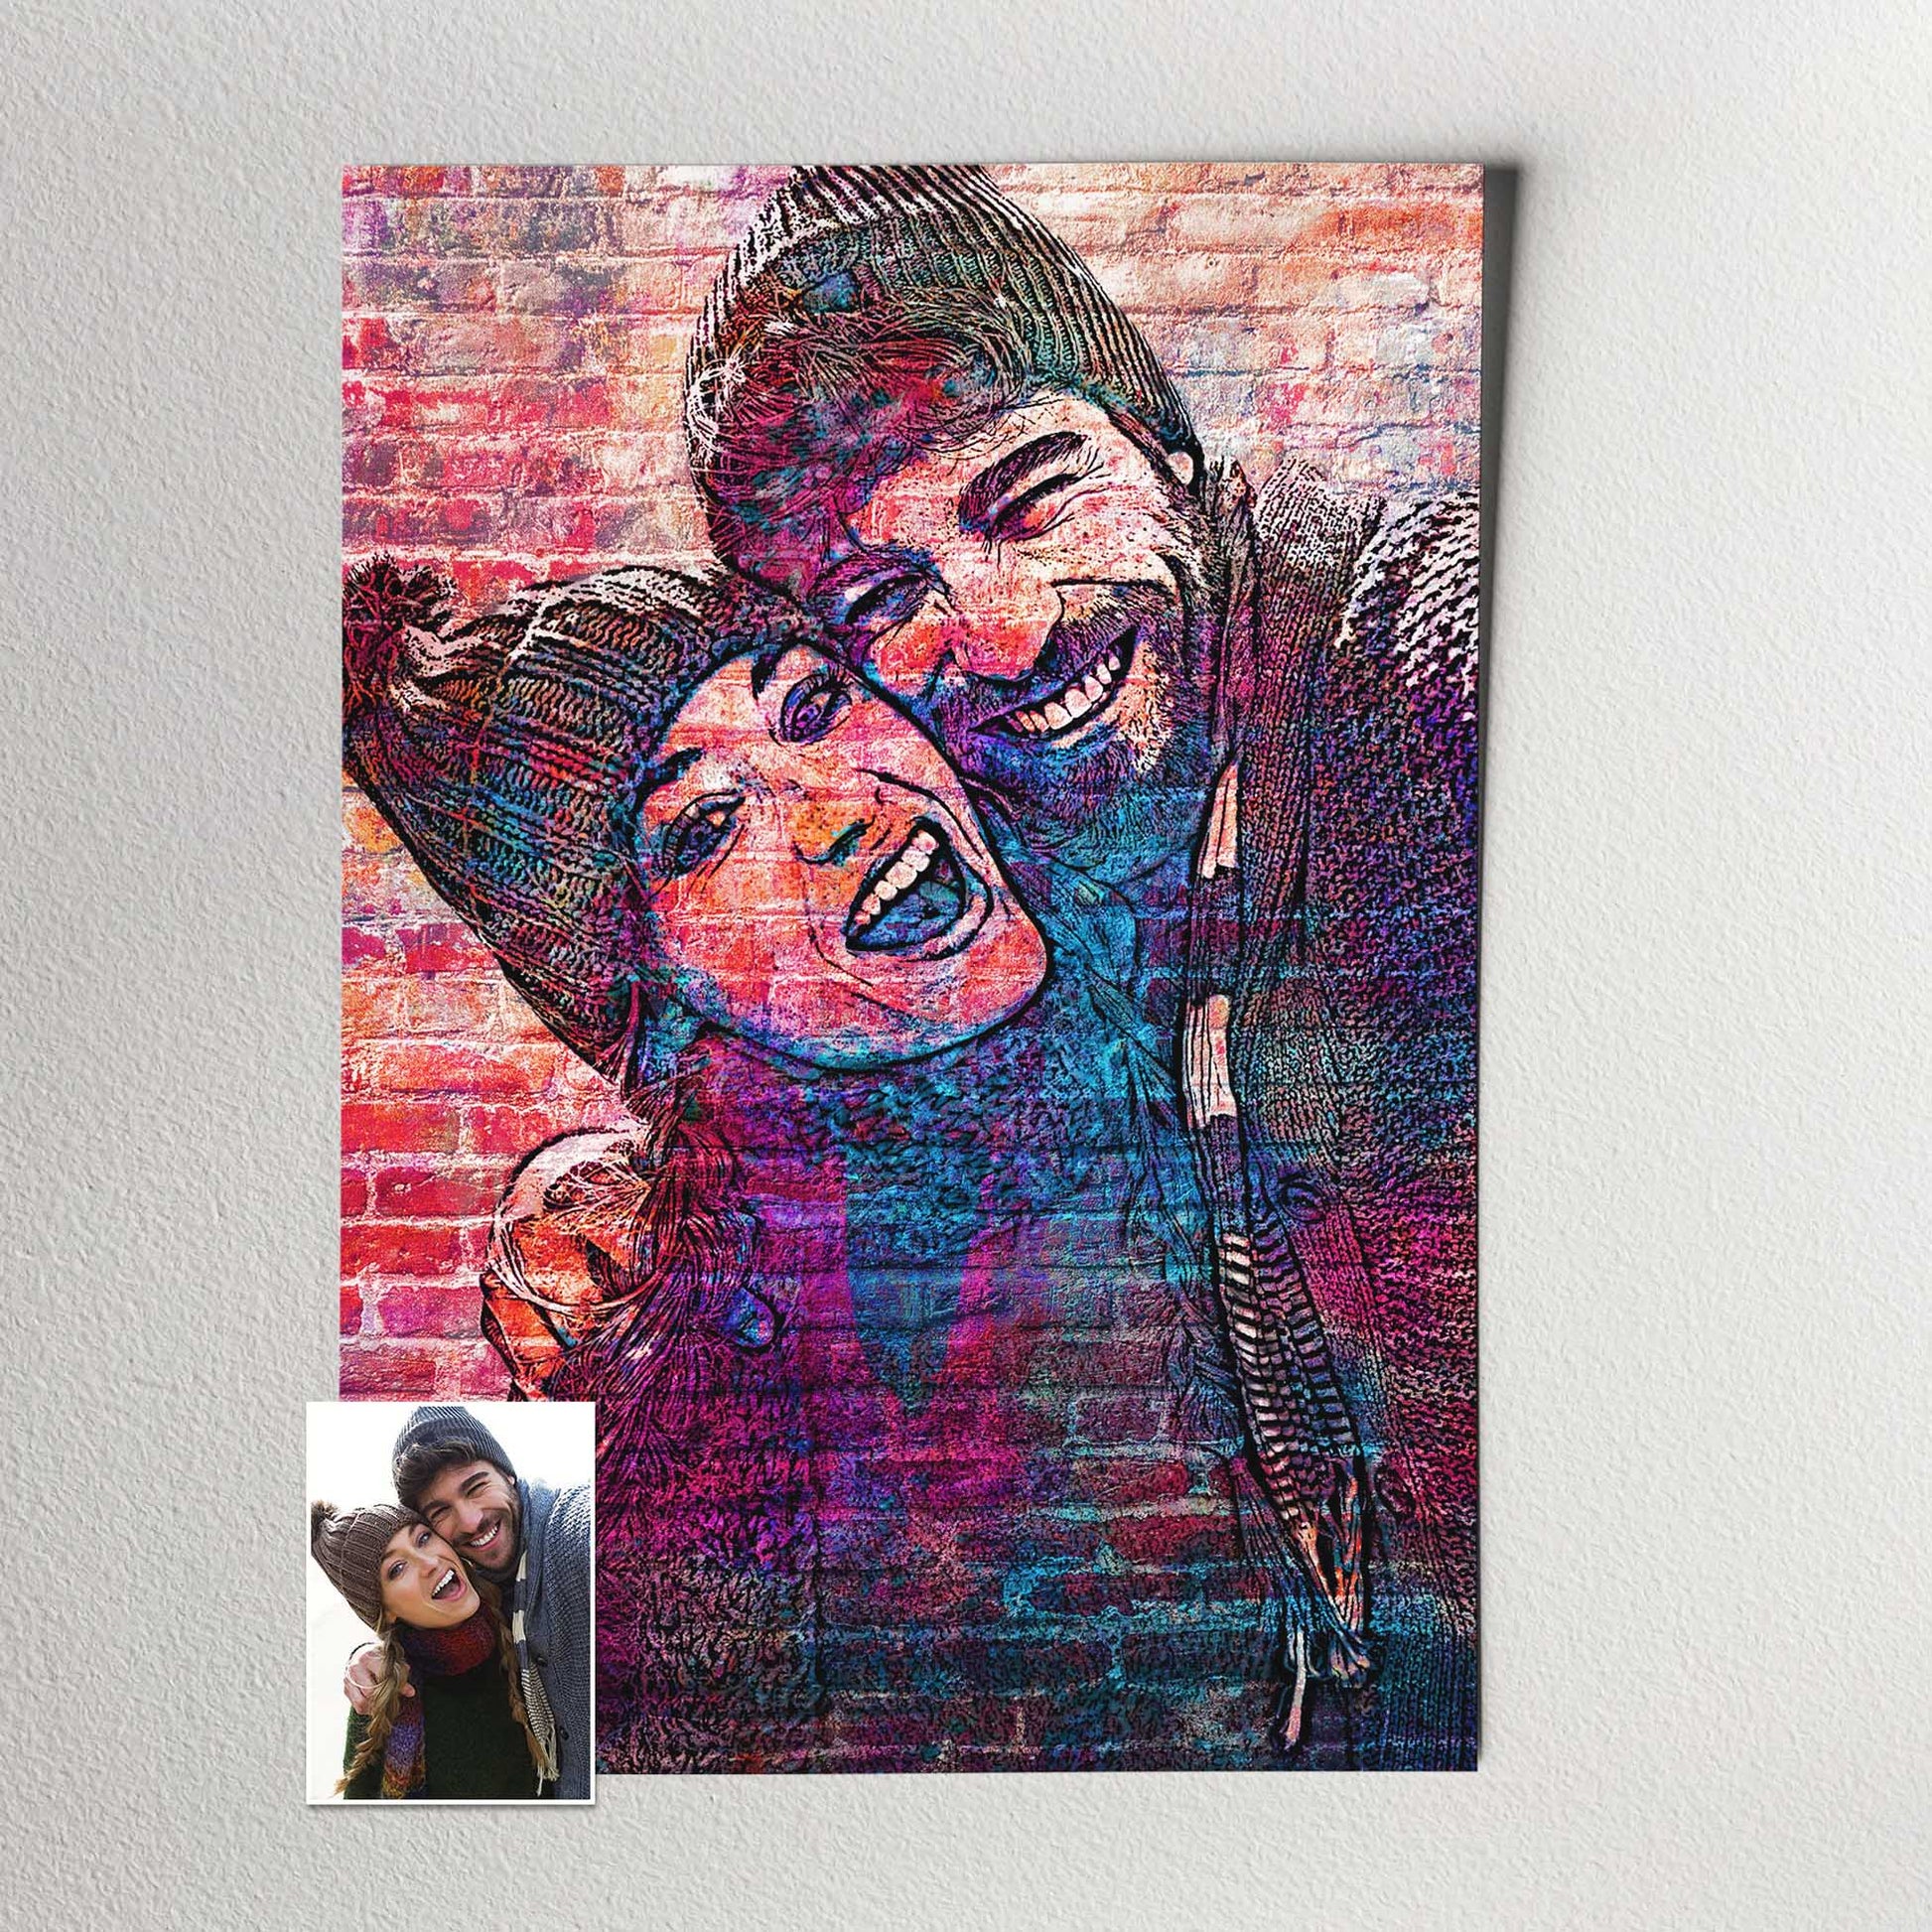 Immerse in Urban Art: Bring the dynamic energy of street art into your home or office with this personalised brick graffiti street art print. Its bold and daring style, coupled with the realistic filter effect